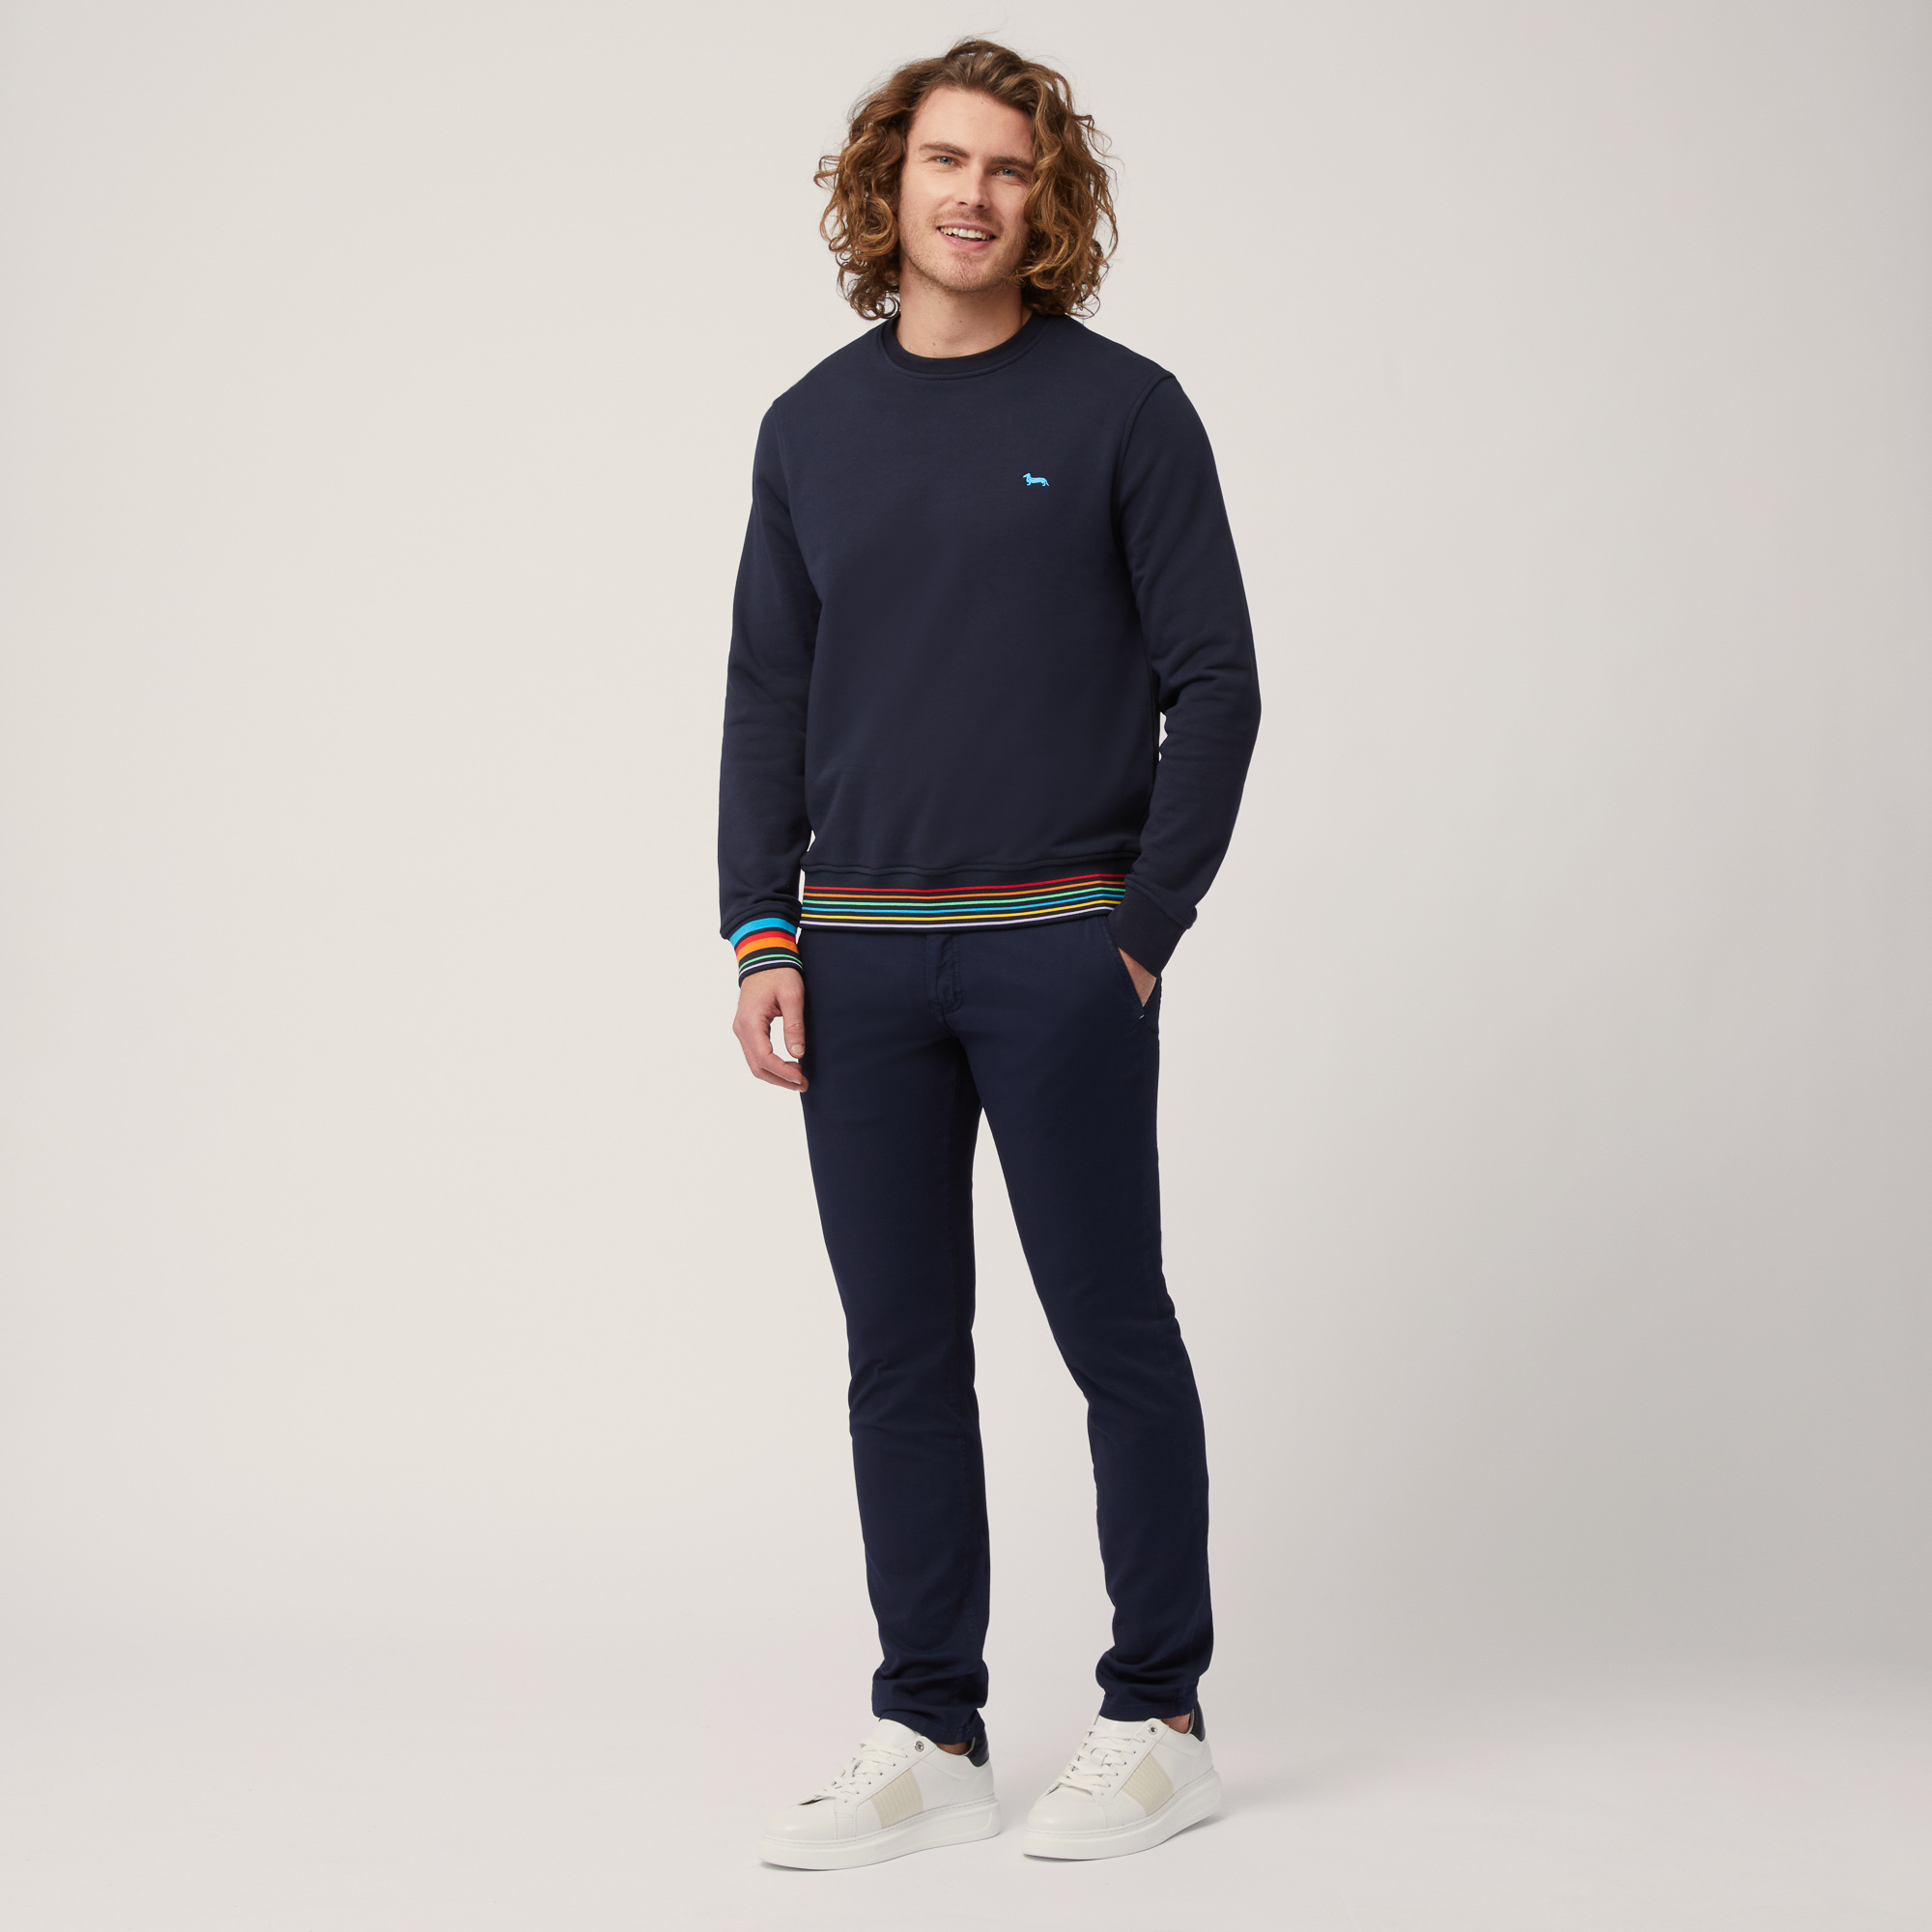 Crew Neck Cotton Pullover with Striped Details, Blue, large image number 3